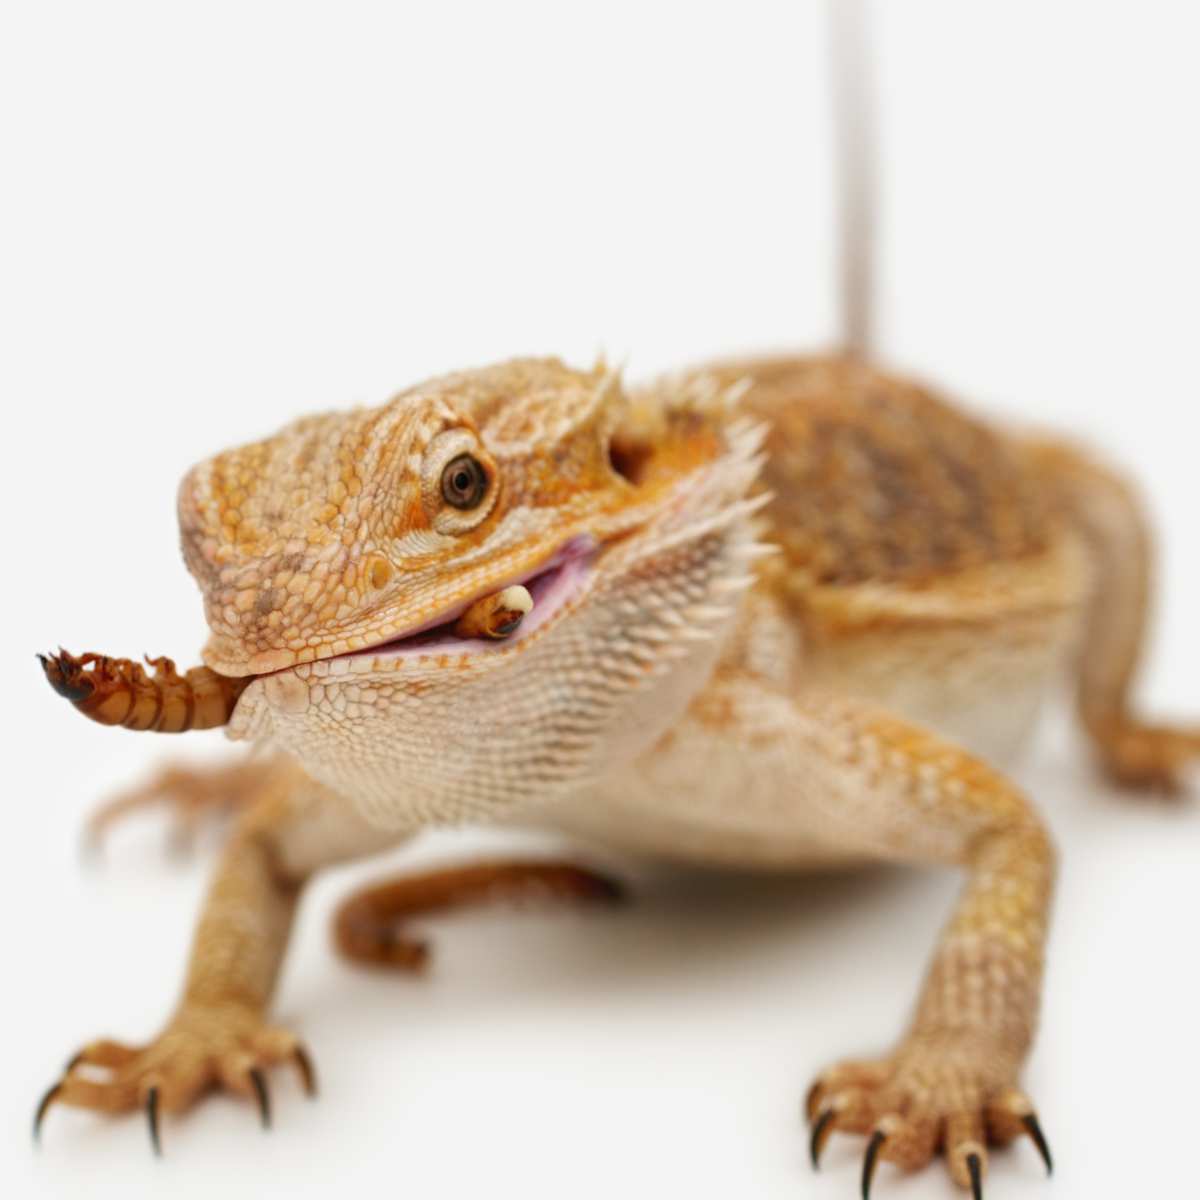 baby bearded dragons eating